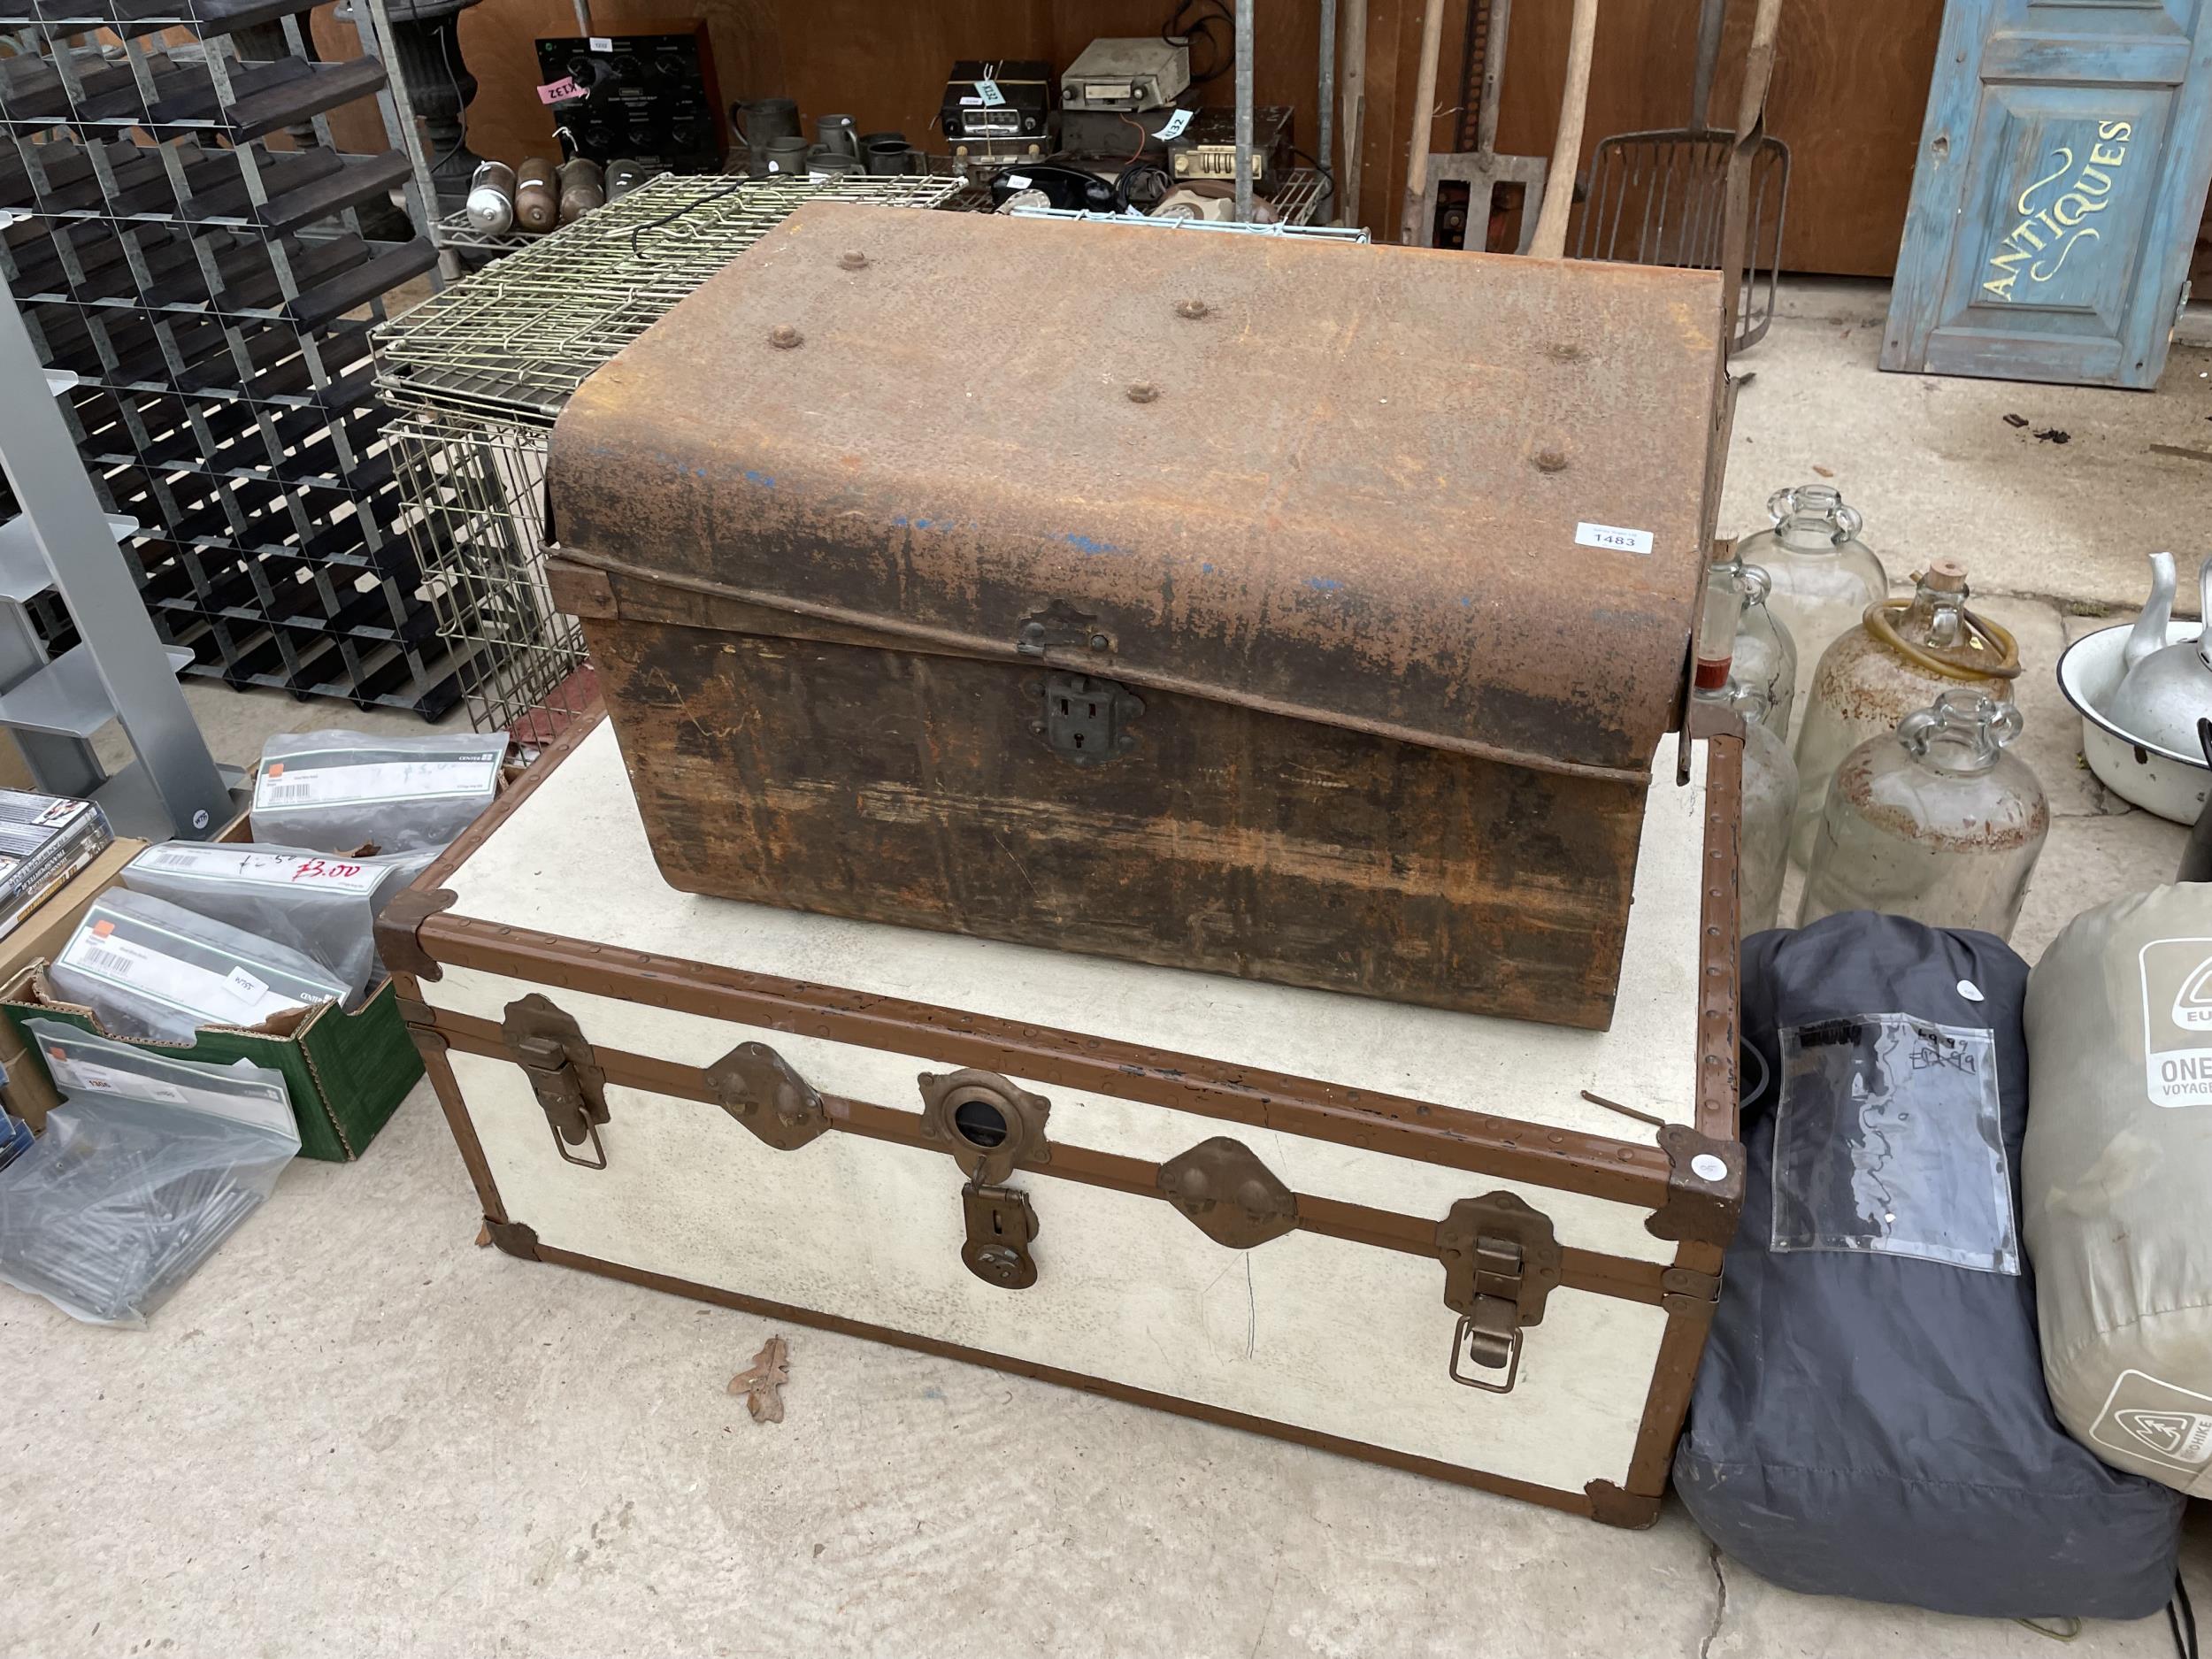 TWO VINTAGE TRAVEL TRUNKS AND THREE SLEEPING BAGS